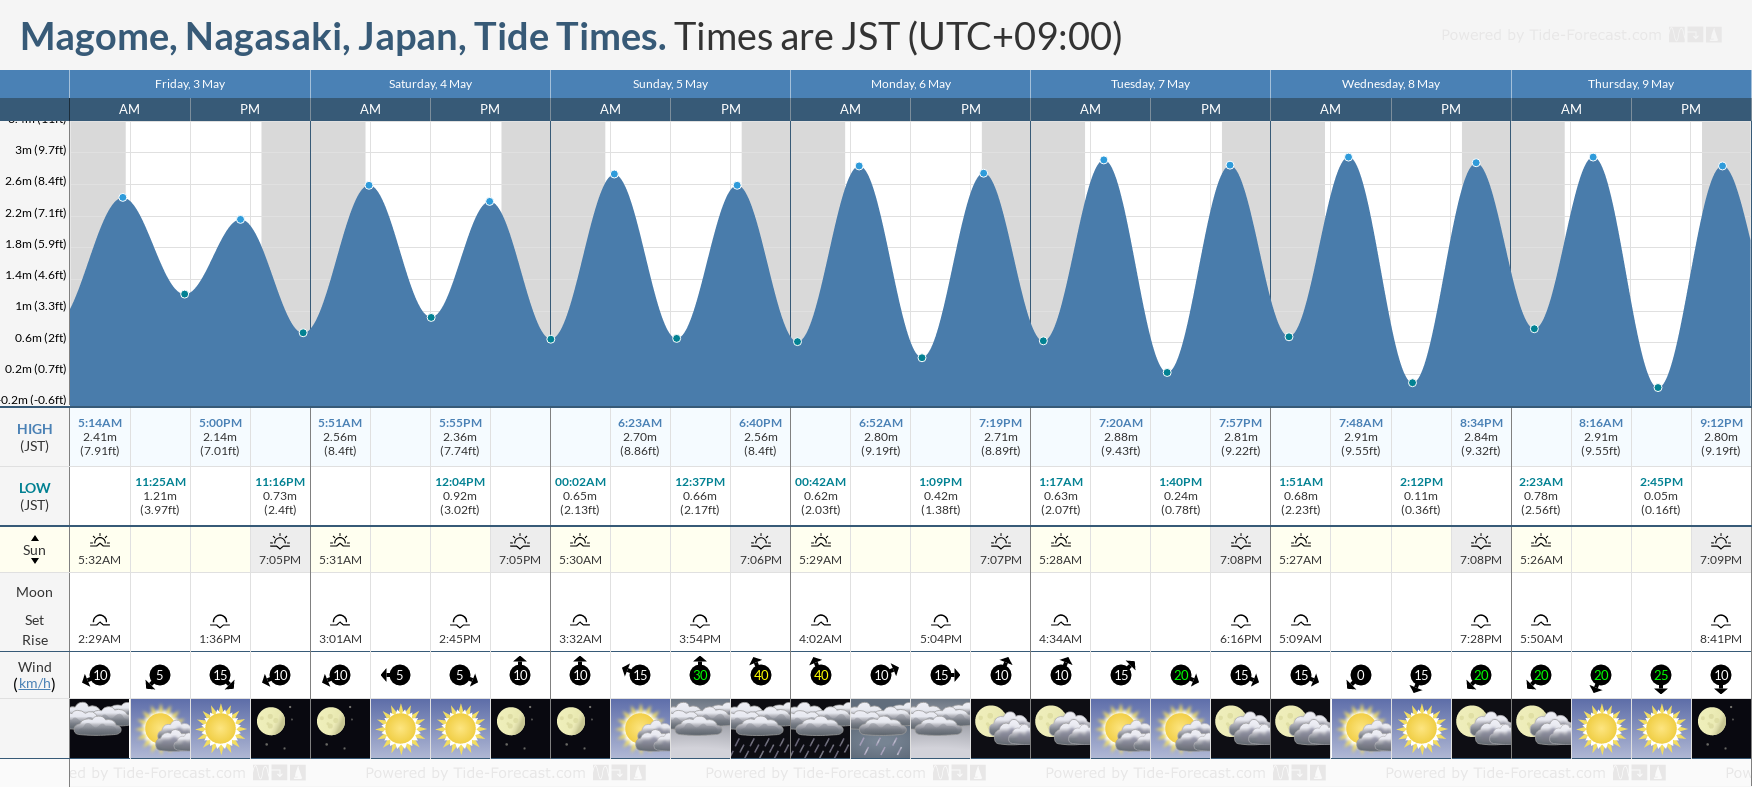 Magome, Nagasaki, Japan Tide Chart including high and low tide tide times for the next 7 days